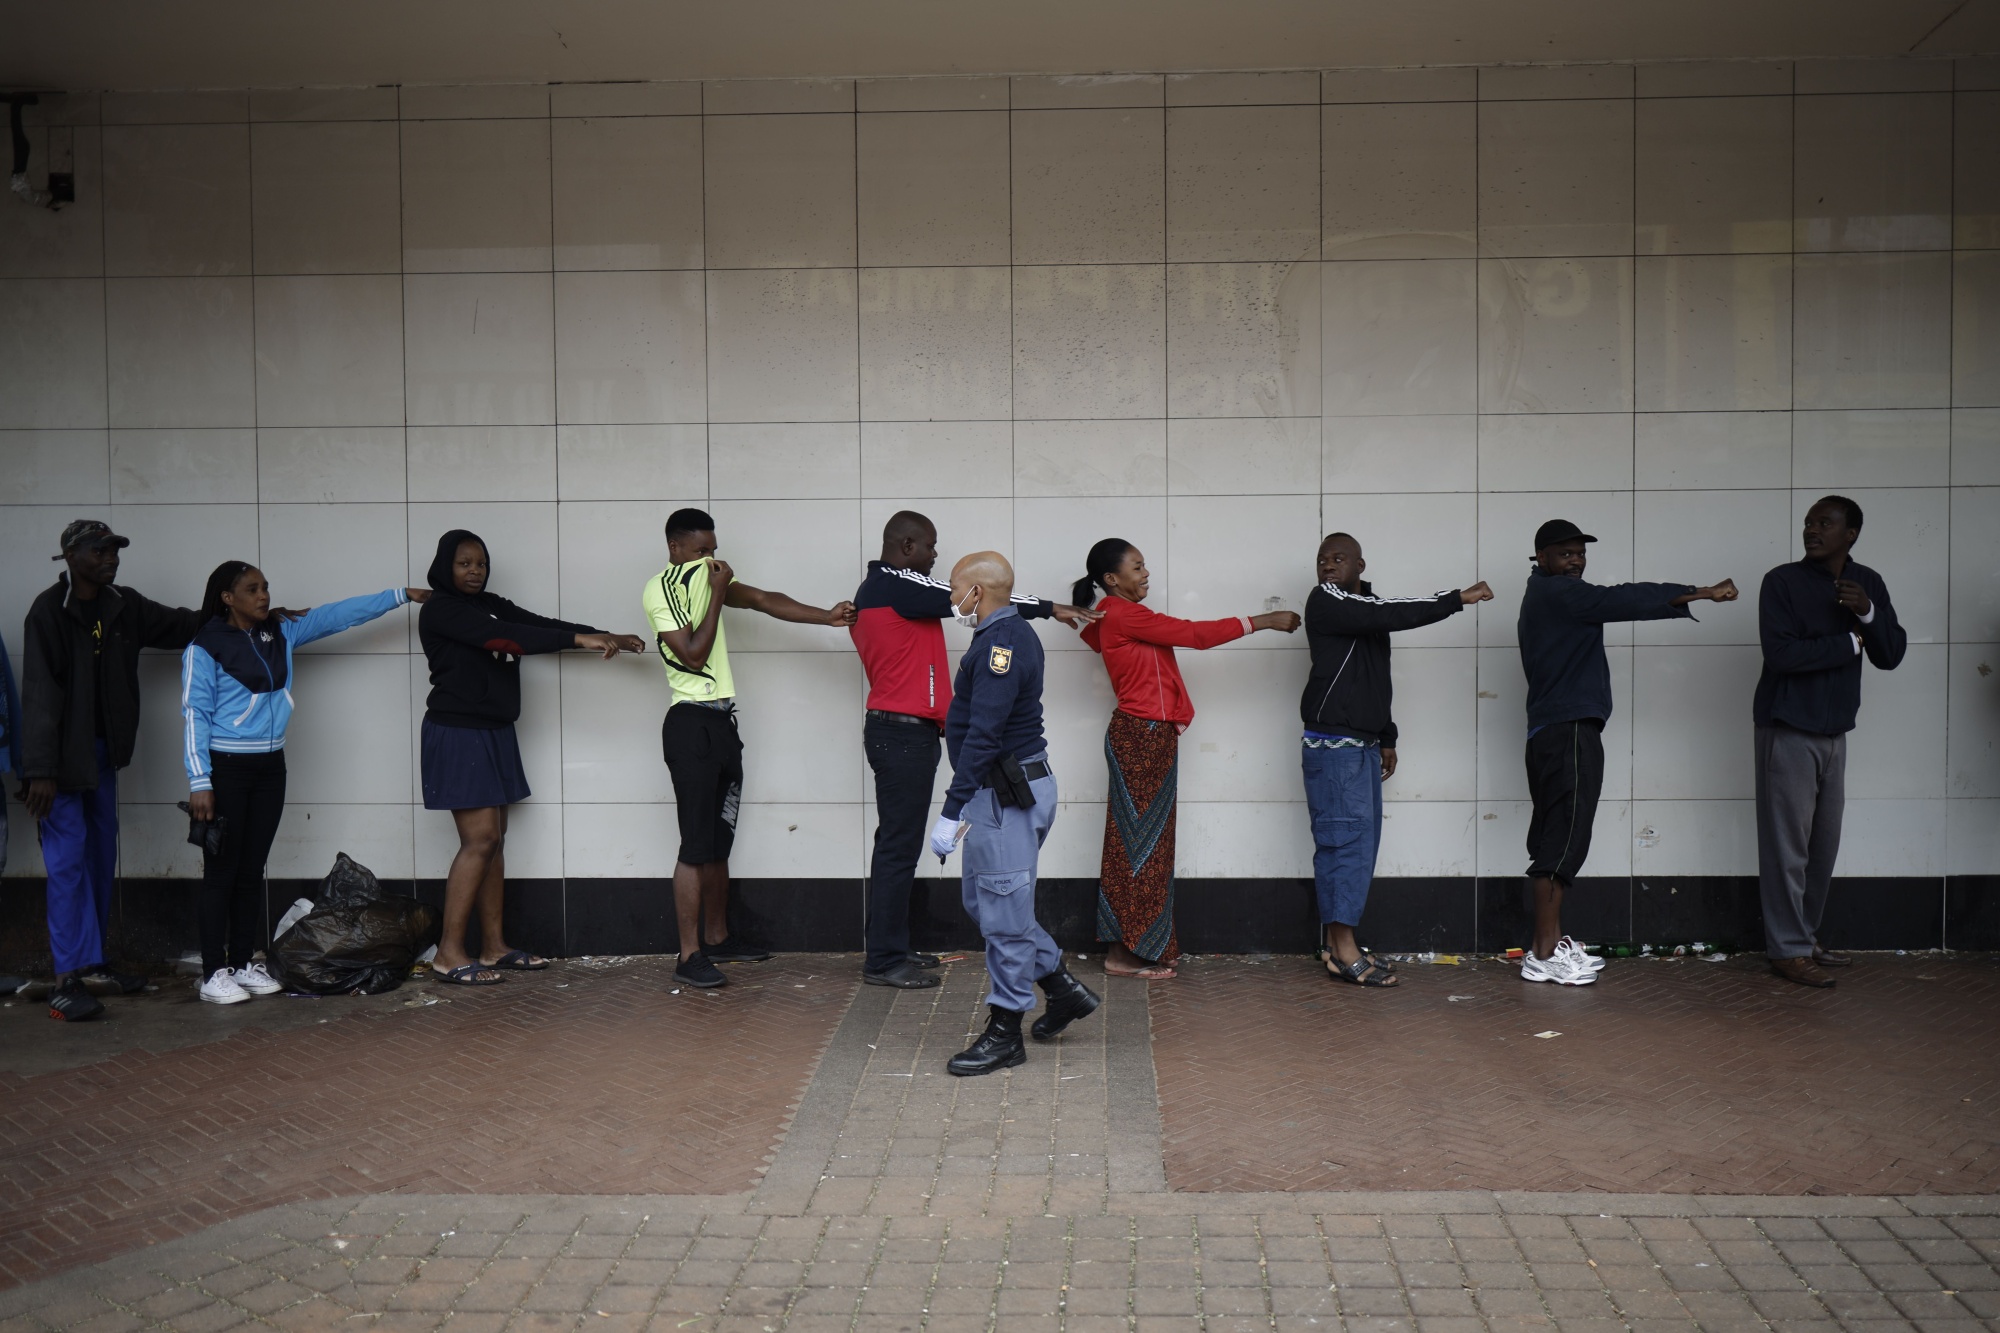 A member of the South African Police Service (SAPS) enforces social distancing of shoppers outside a supermarket in Yeoville, Johannesburg, on March 28.